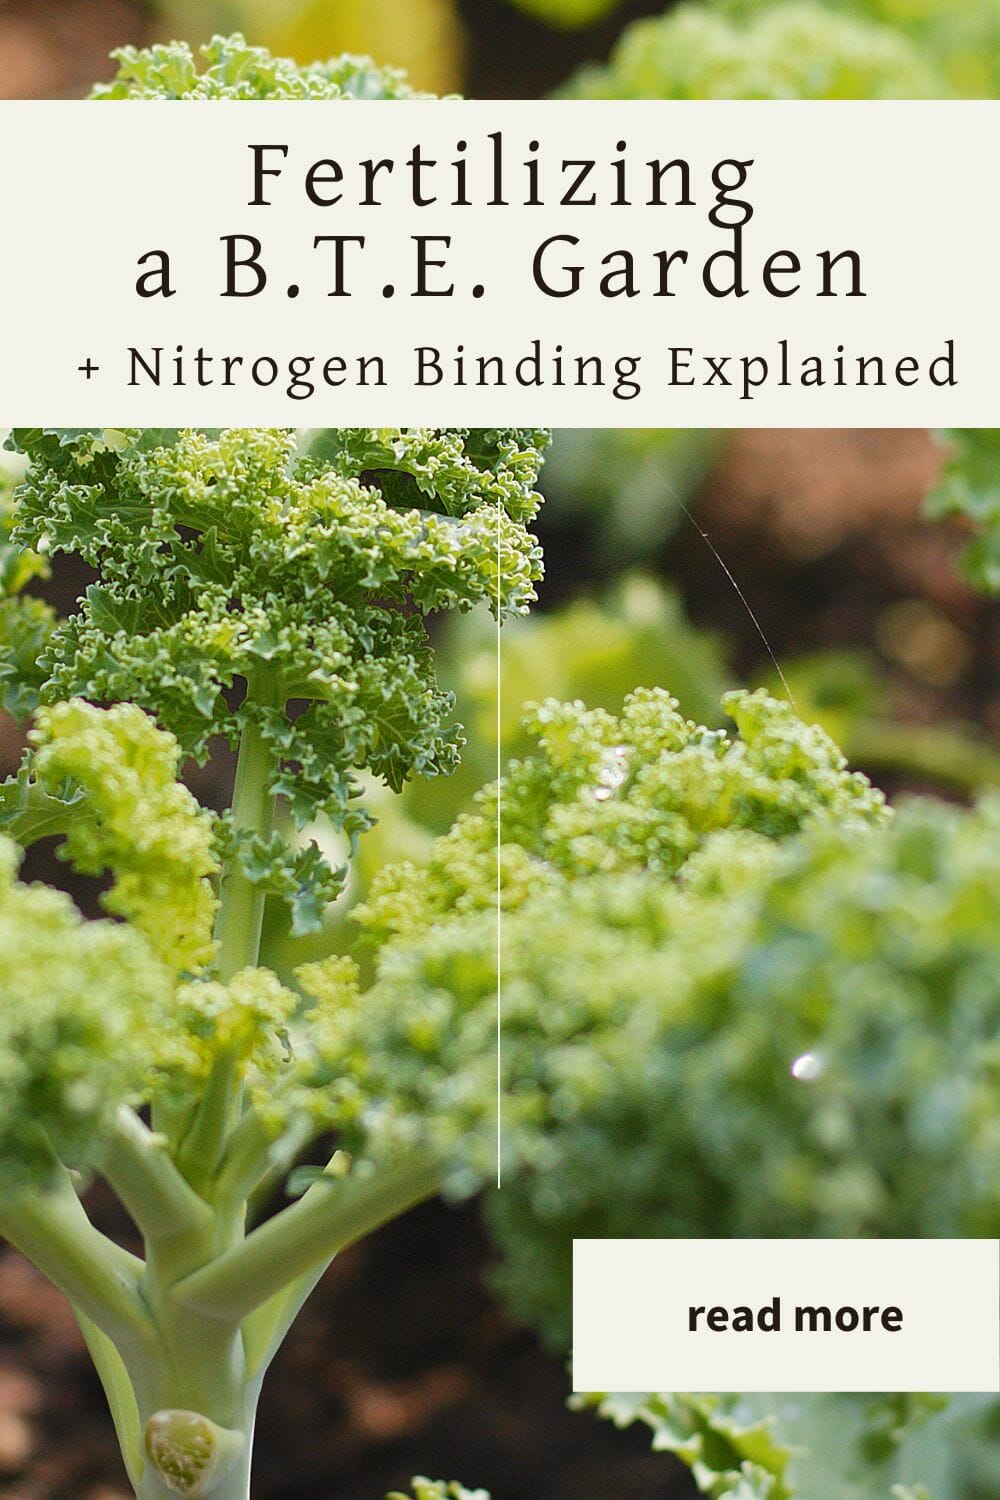 A pinterest-friendly graphic for how to fertilize a back to eden garden organically and explain why nitrogen binding isn't an issue.